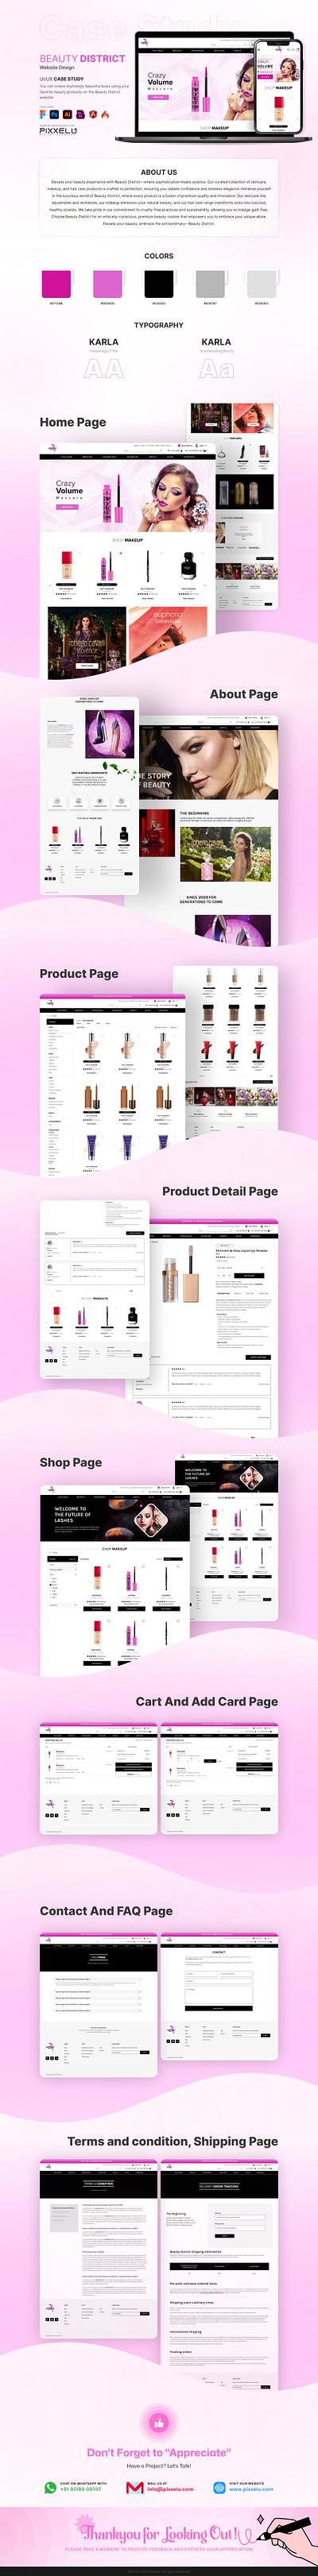 Website Showcase beauty beauty clinic website case study cosmetic brand identity cosmetics ecommerce skincare make up makeup store product shopping ui skincare shop skincare website